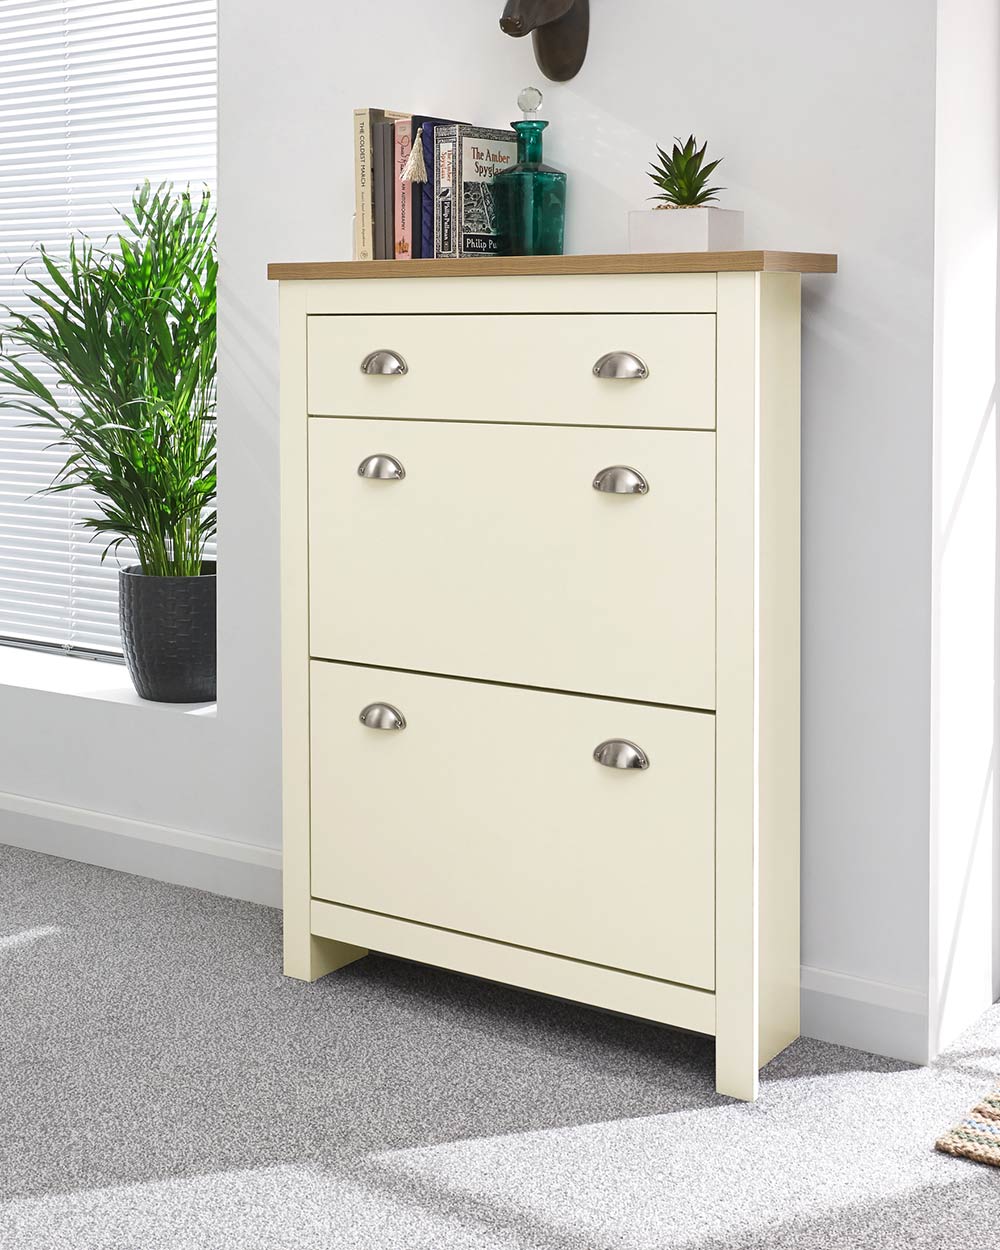 lancaster shoe storage cabinet in cream in  a lifestyle setting.